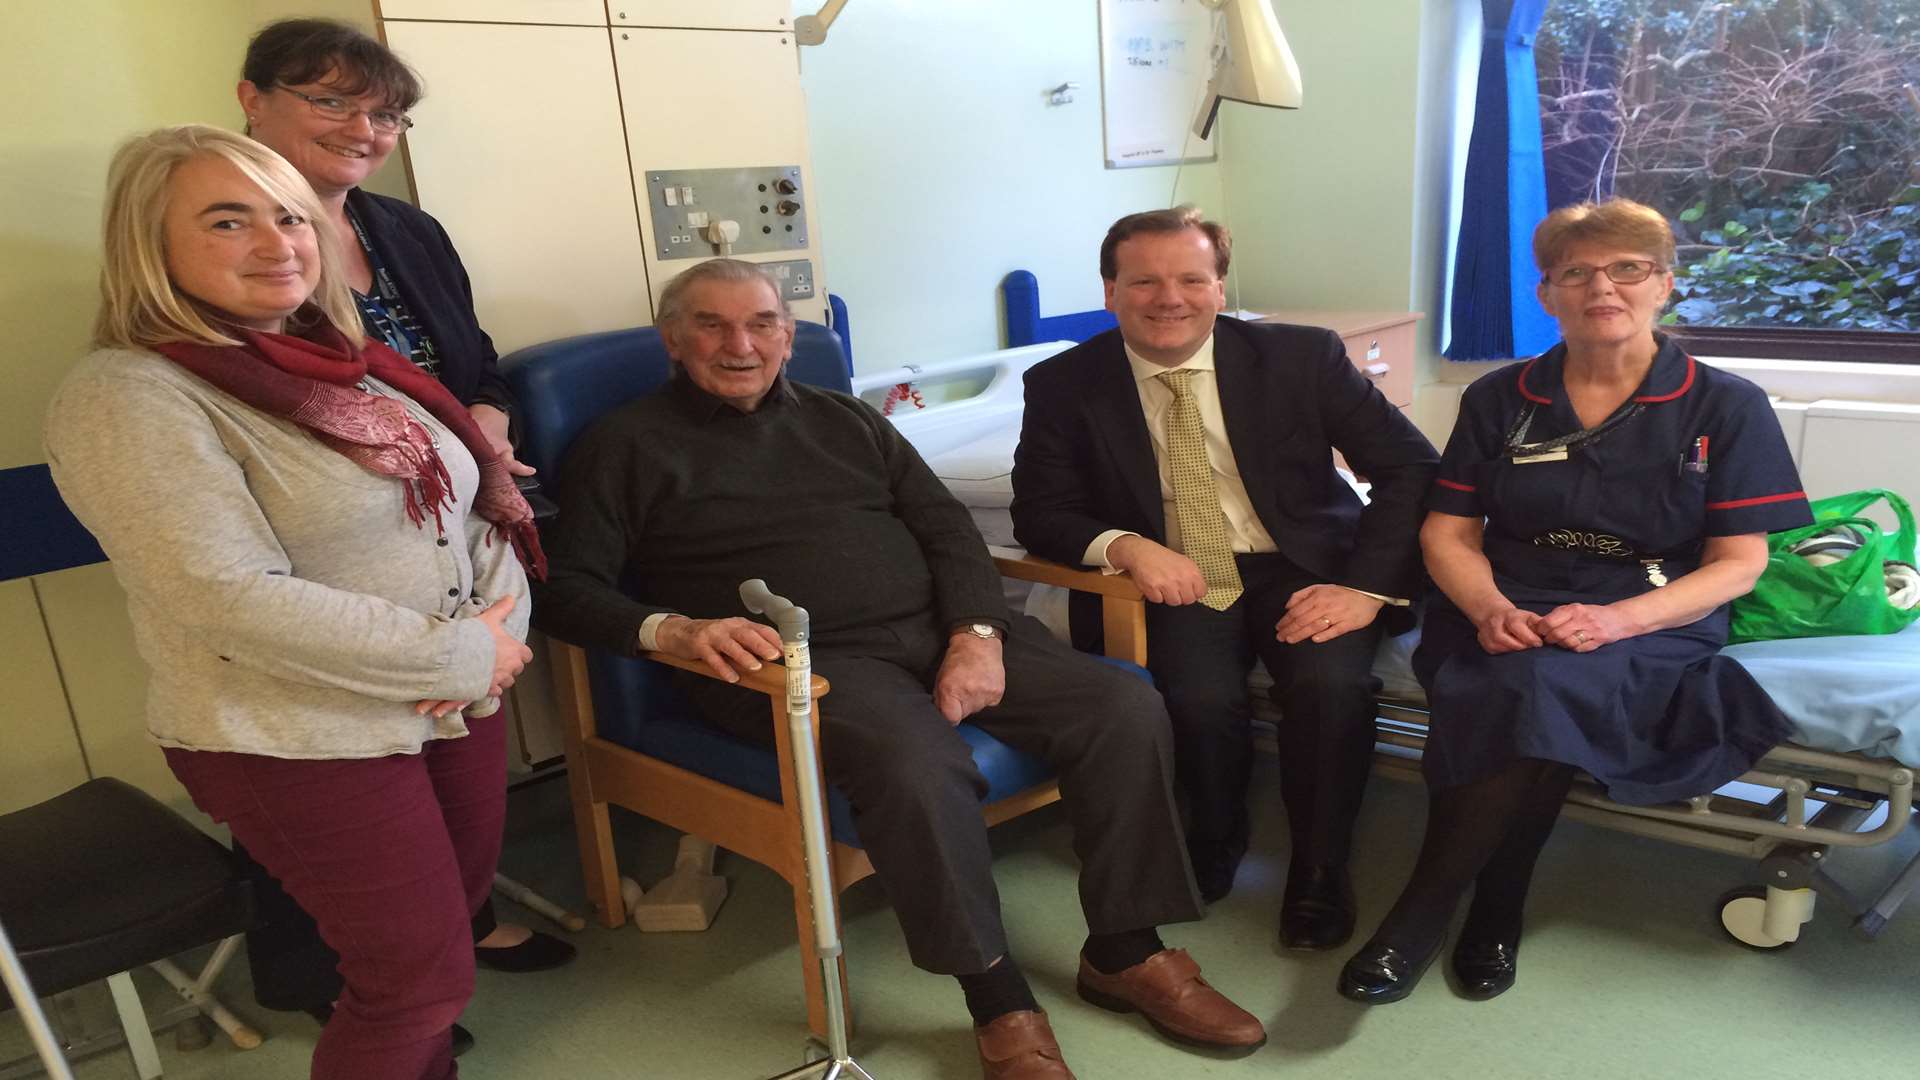 MP Charlie Elphicke with the team at Deal Hospital